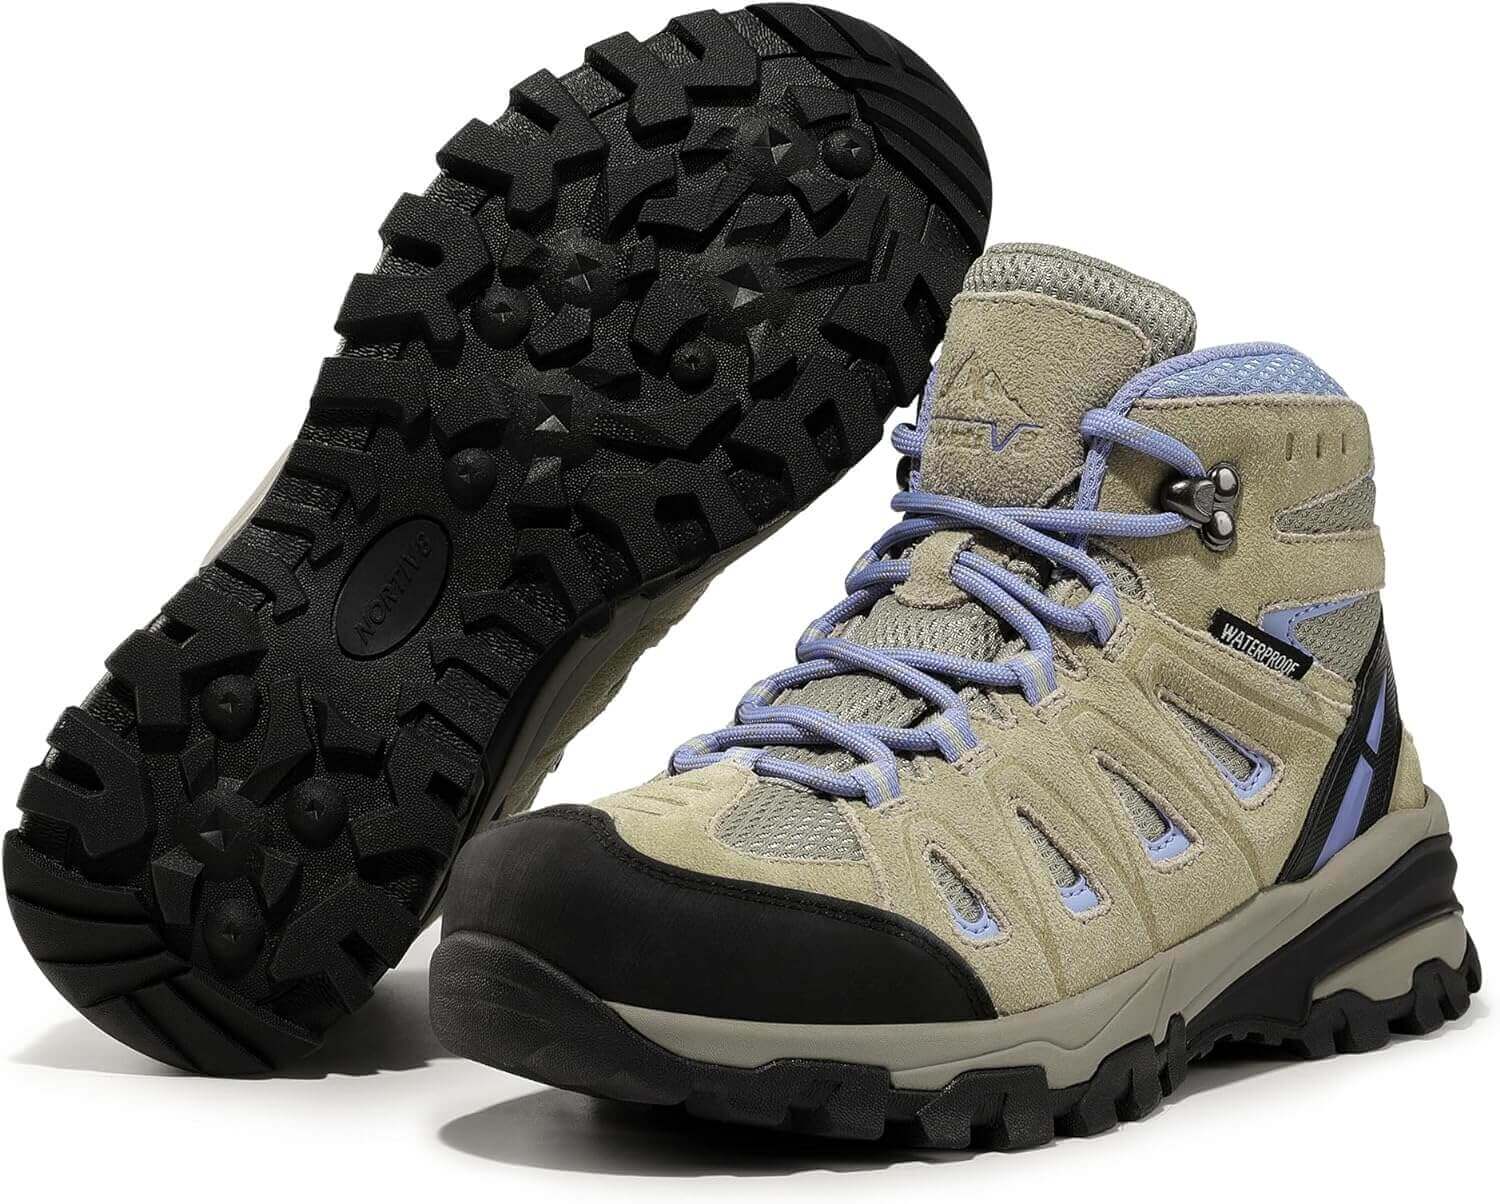 Shop The Latest >NORTIV 8 Women's Waterproof Trail Hiking Boots > *Only $69.99*> From The Top Brand > *NORTIV 8l* > Shop Now and Get Free Shipping On Orders Over $45.00 >*Shop Earth Foot*